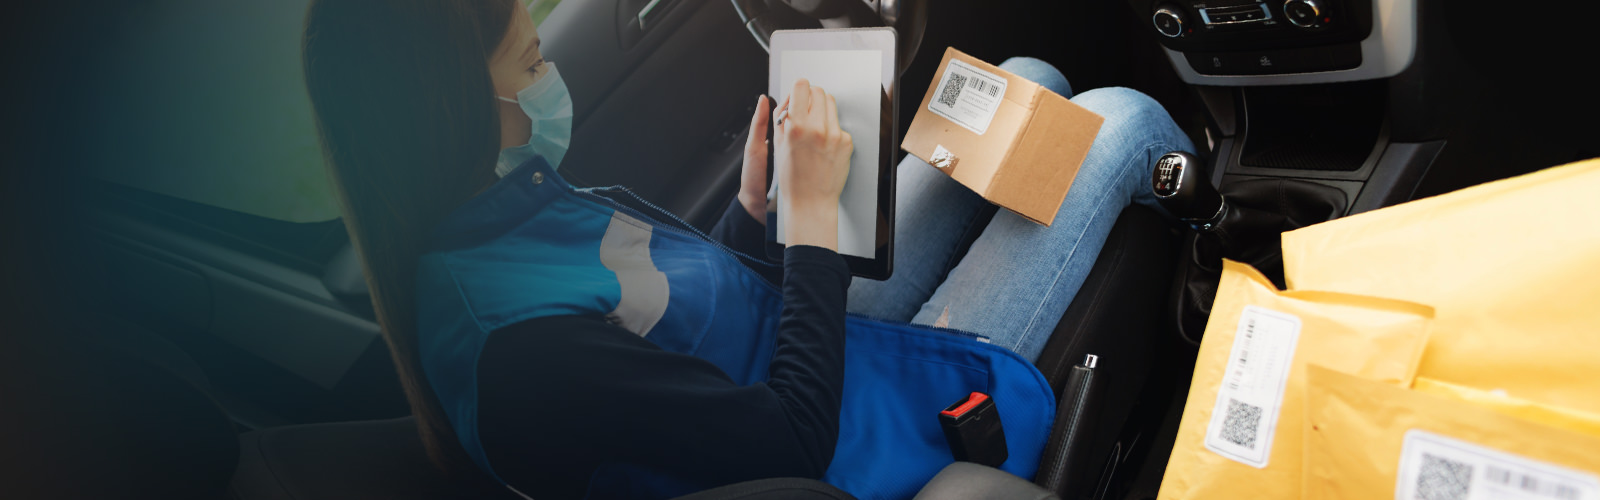 Woman using a tablet with packages nearby.